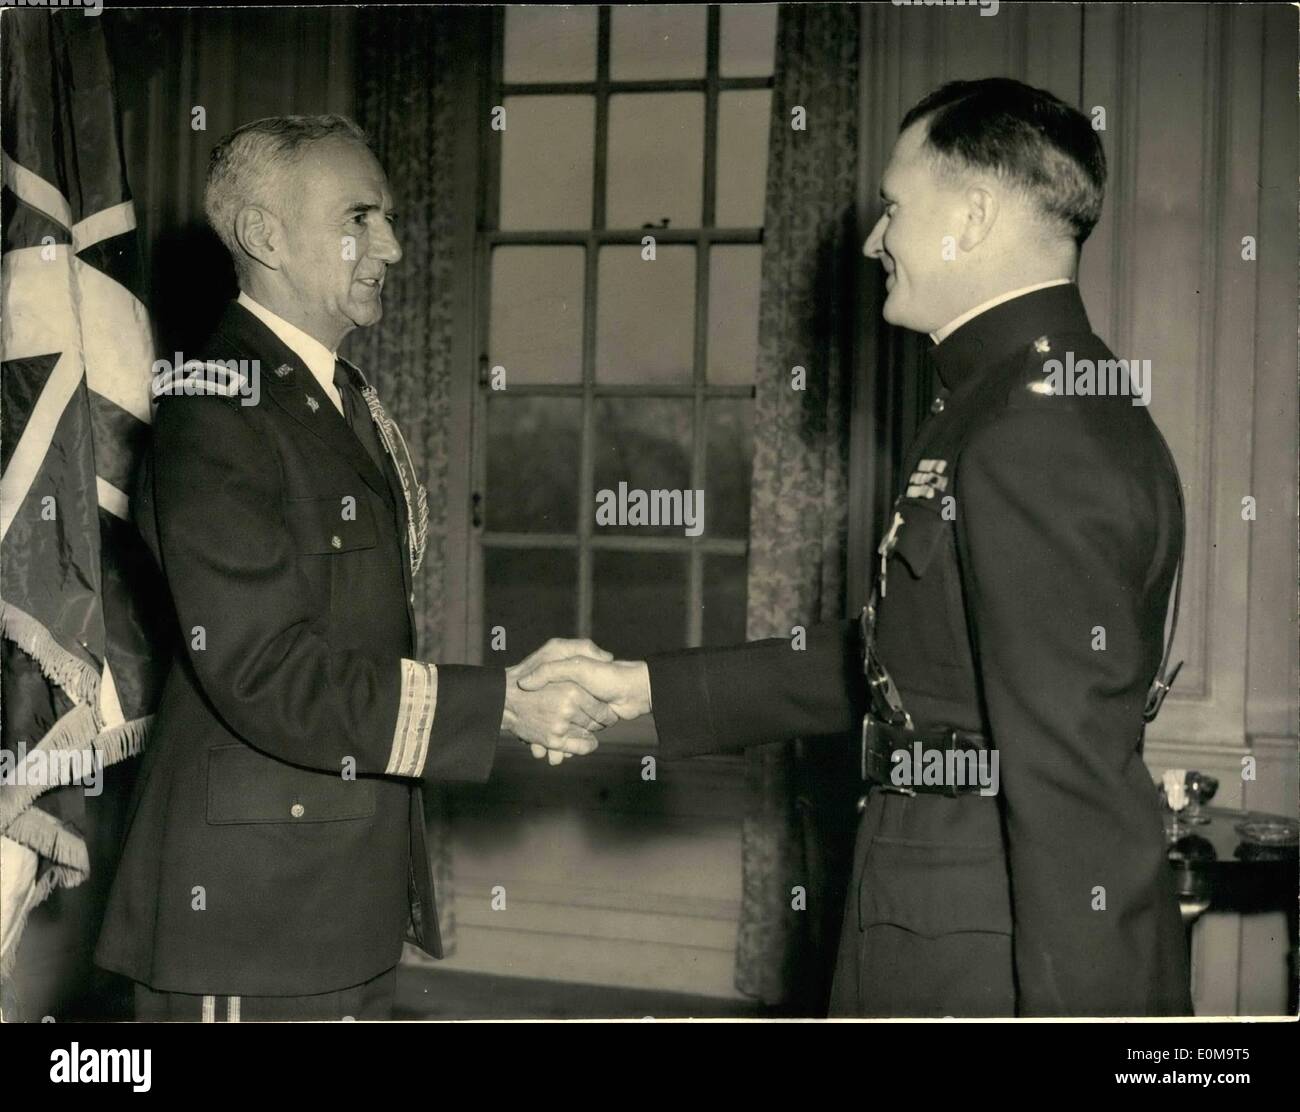 Mar. 03, 1954 - American Decoration For British Colonel: Colonel. A.M. Man, DSO, OBE, HQ North-Umbrian District, Catterick Camp, Yorks, Receives The Legion Of Merit In The Degree Of Legionnaire From The U.S. Army Attache General R.E.S. Williamson (Left) At To-Day;s, Mar 19, American Investiture At London's Winfield House. Colonel Man Was Decorated For Distinguished Service When Leading The 1st Battalion, Middlesex Regiment, In The British Commonwealth Division During The Fighting In Korea Stock Photo